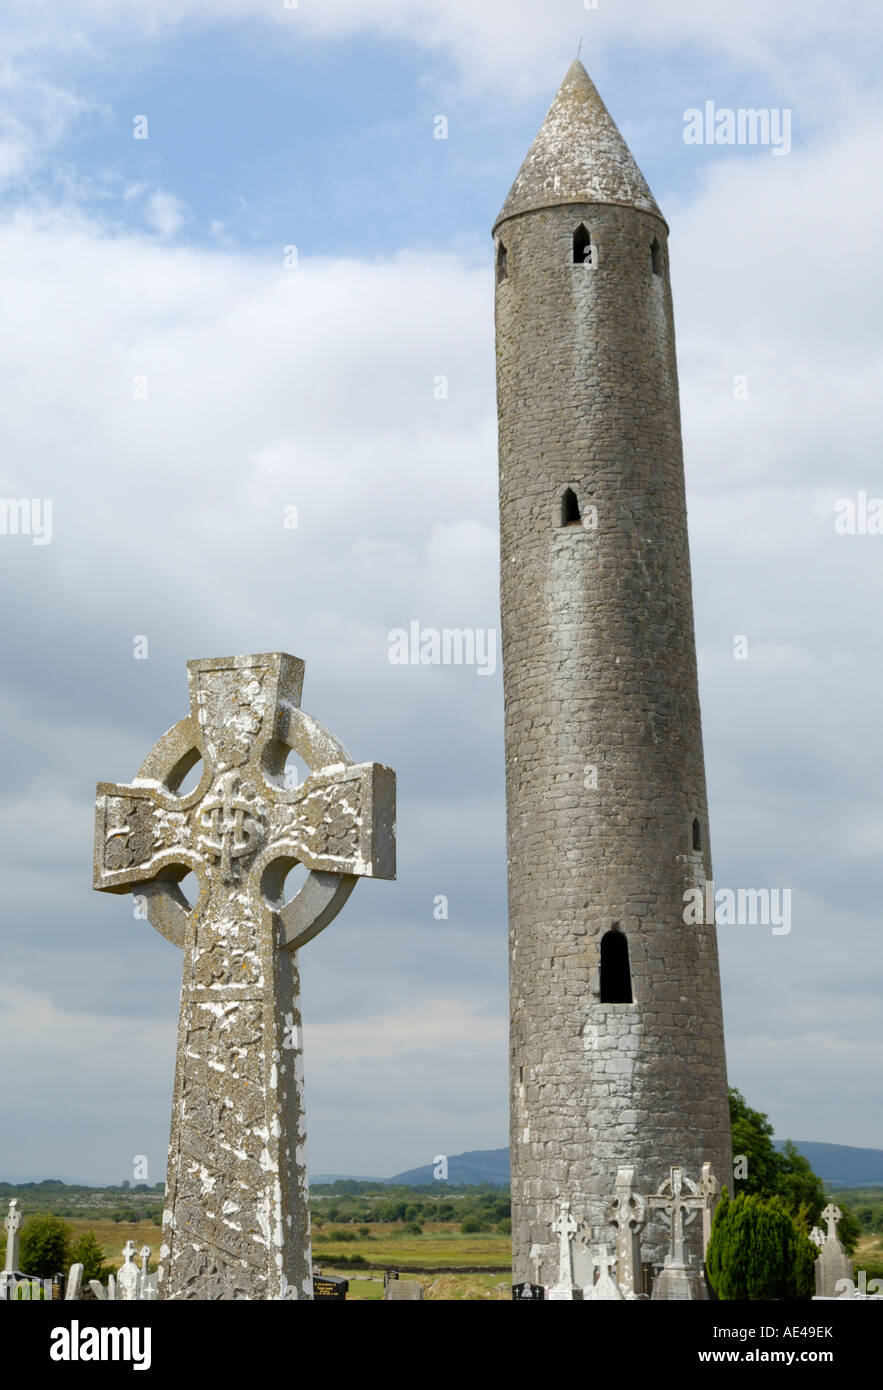 Kilmacdaugh Round Tower and Celtic style cross, near Gort, County Galway, Connacht, Republic of Ireland, Europe Stock Photo